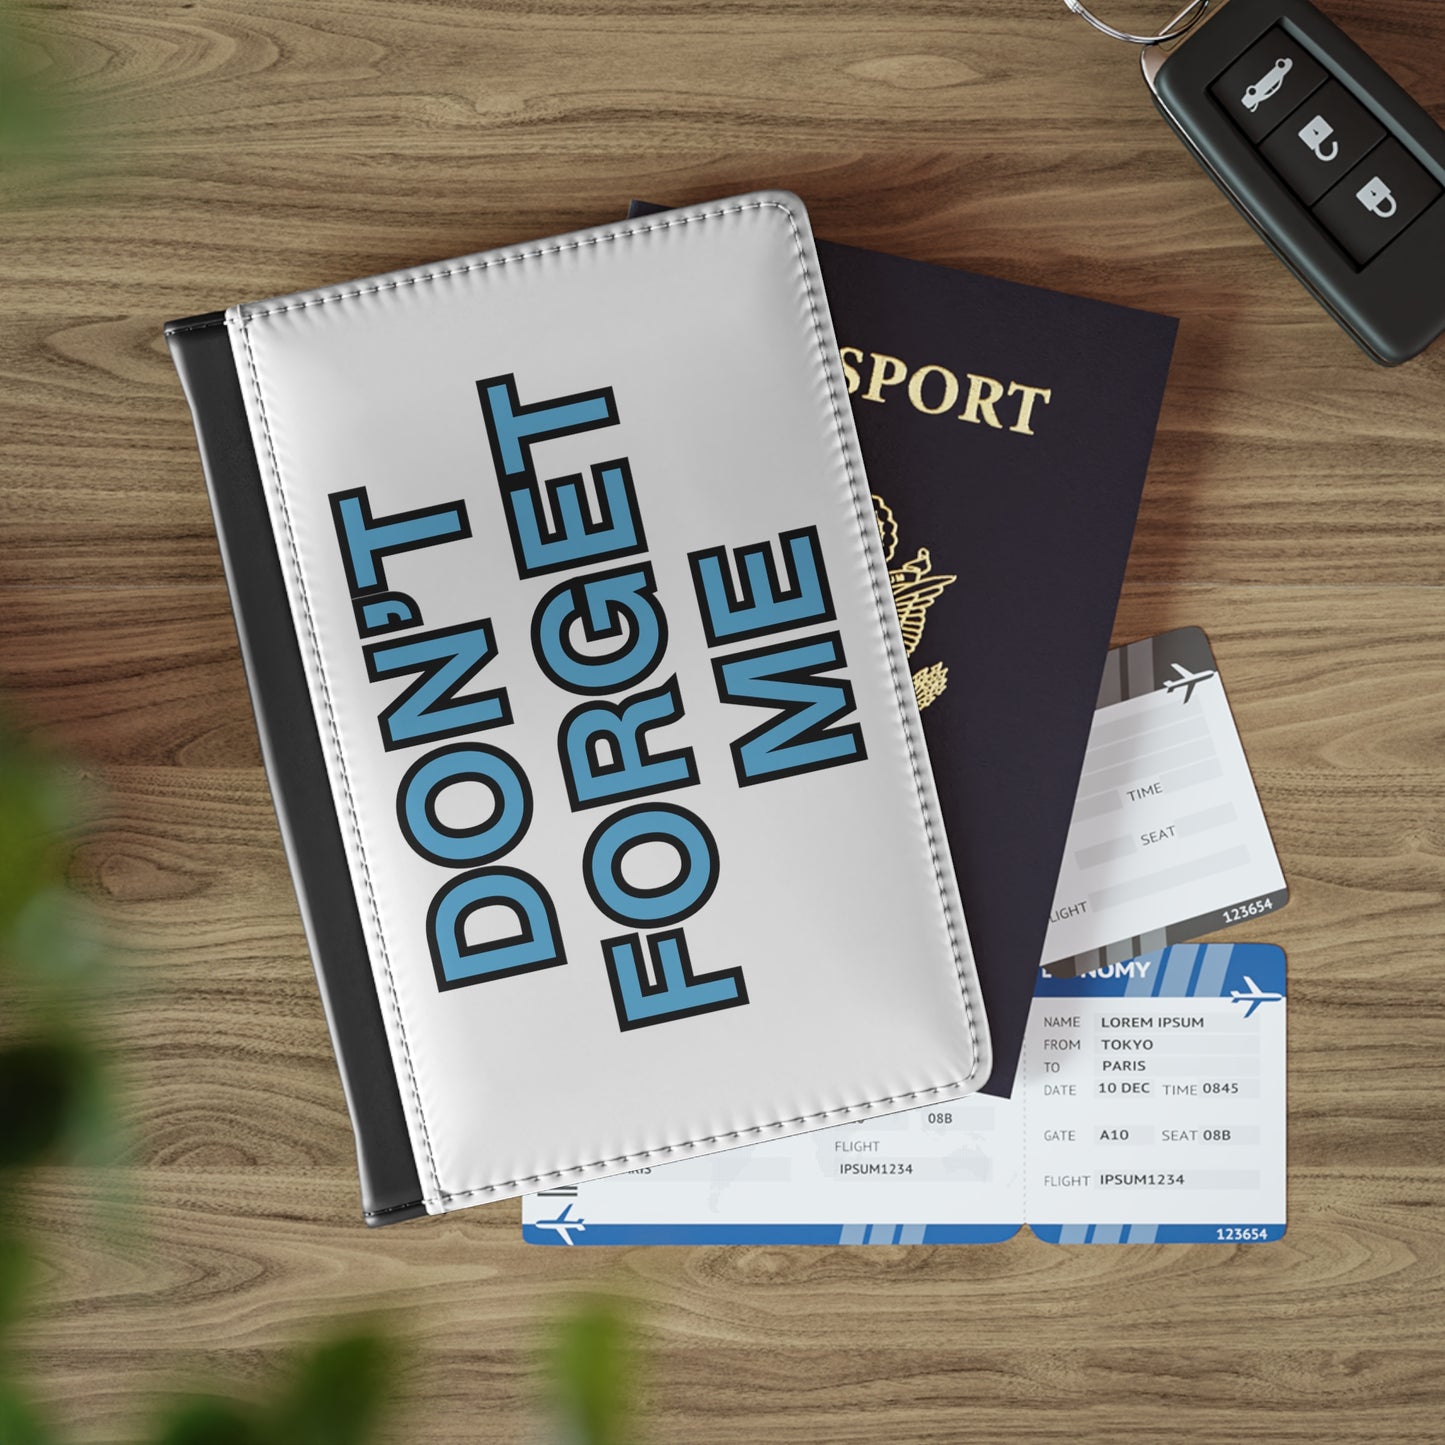 Don't Forget Me Passport Cover